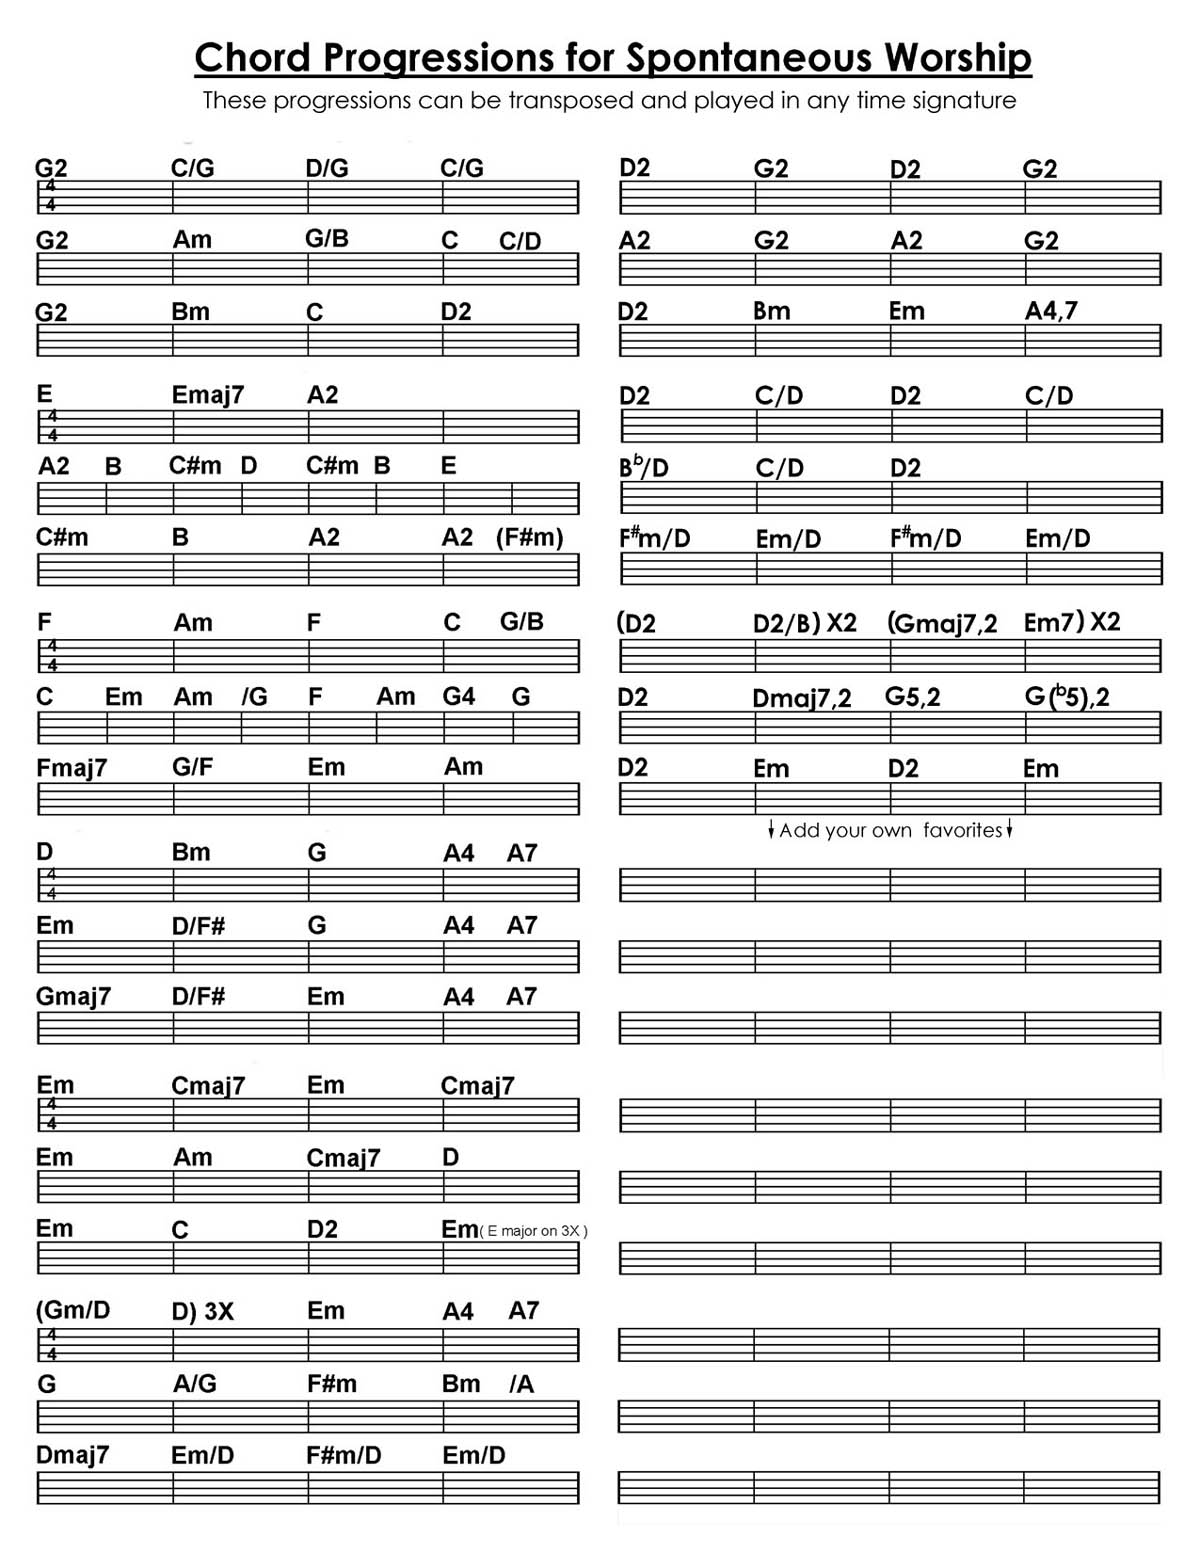 Common Worship Chord Progressions Chord Walls 9225 Hot Sex Picture